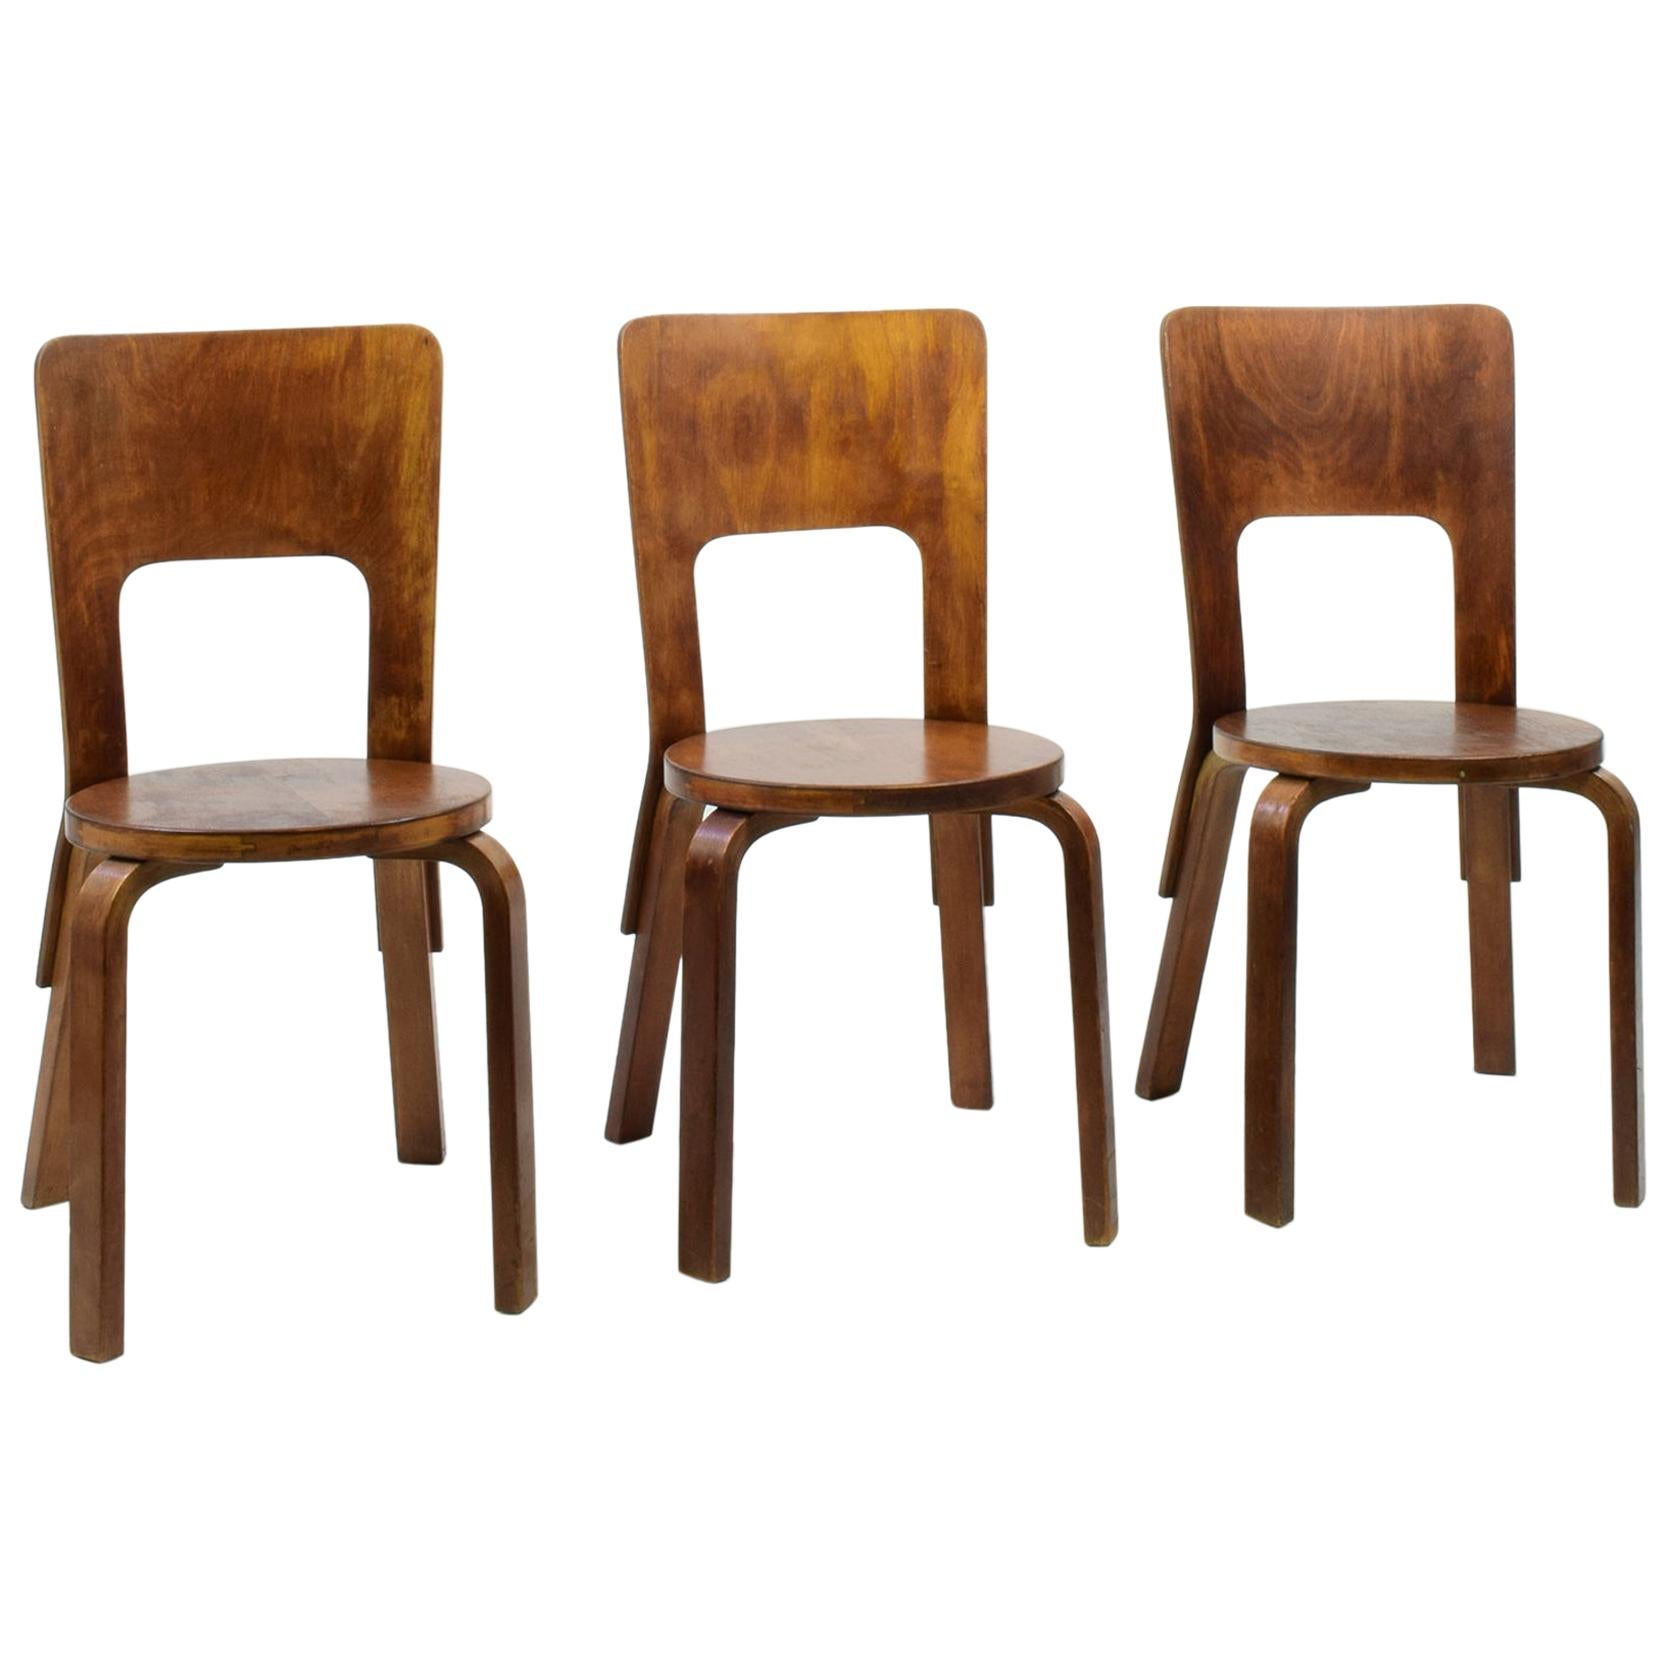 Alvar Aalto, Set of 3 Model 66 Chairs, 1933, Original Early Production